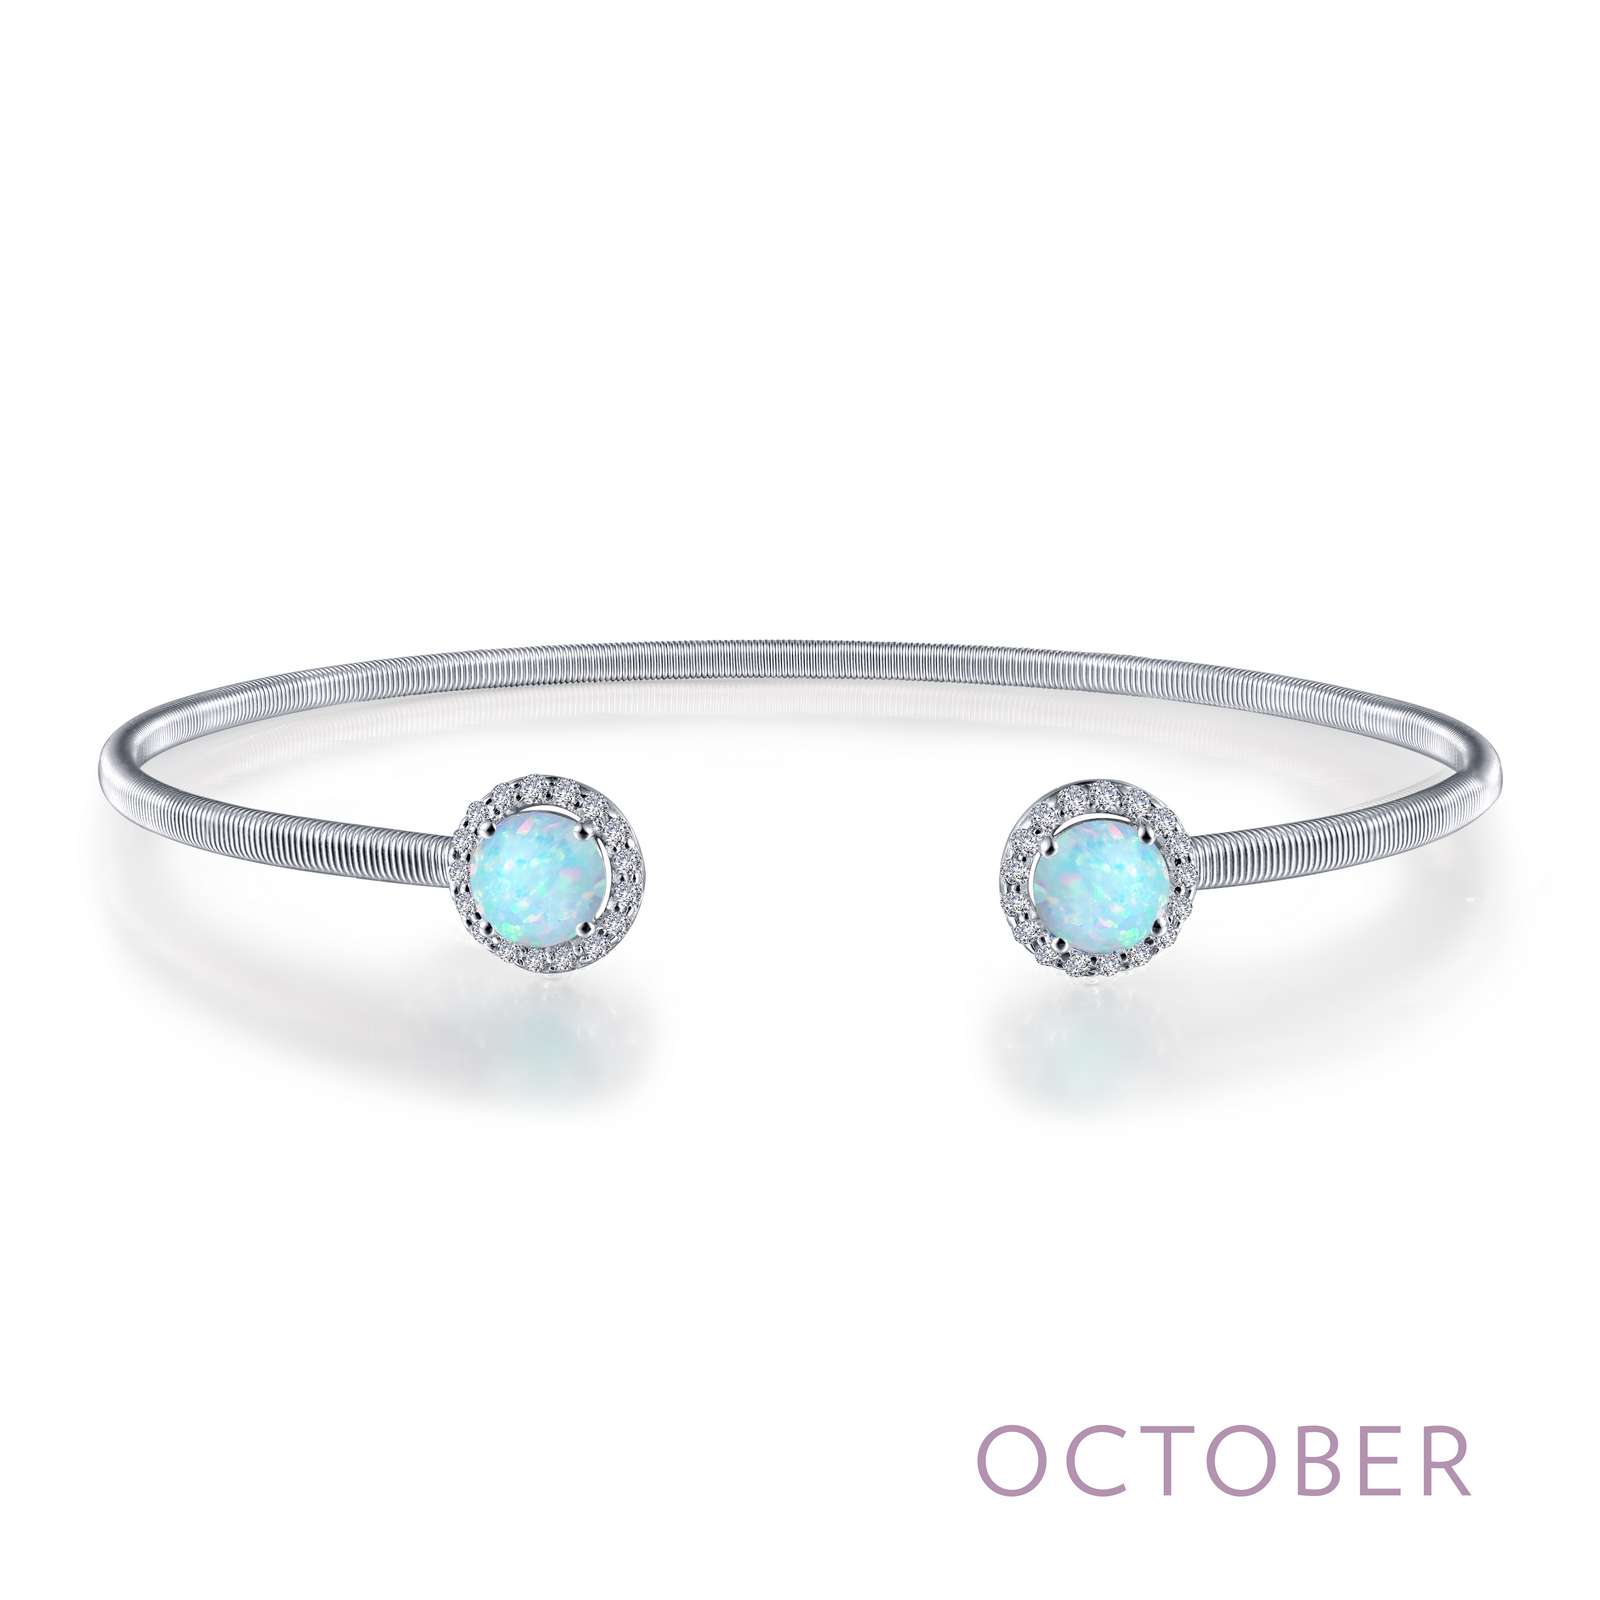 October Birthstone Bracelet - October - Opal. Adorn yourself with Lafonn's birthstone jewelry. This flexible stackable open cuff halo bangle bracelet is set with Lafonn's signature Lassaire simulated diamonds and simulated opals. Bracelet is in sterling silver bonded with platinum. 